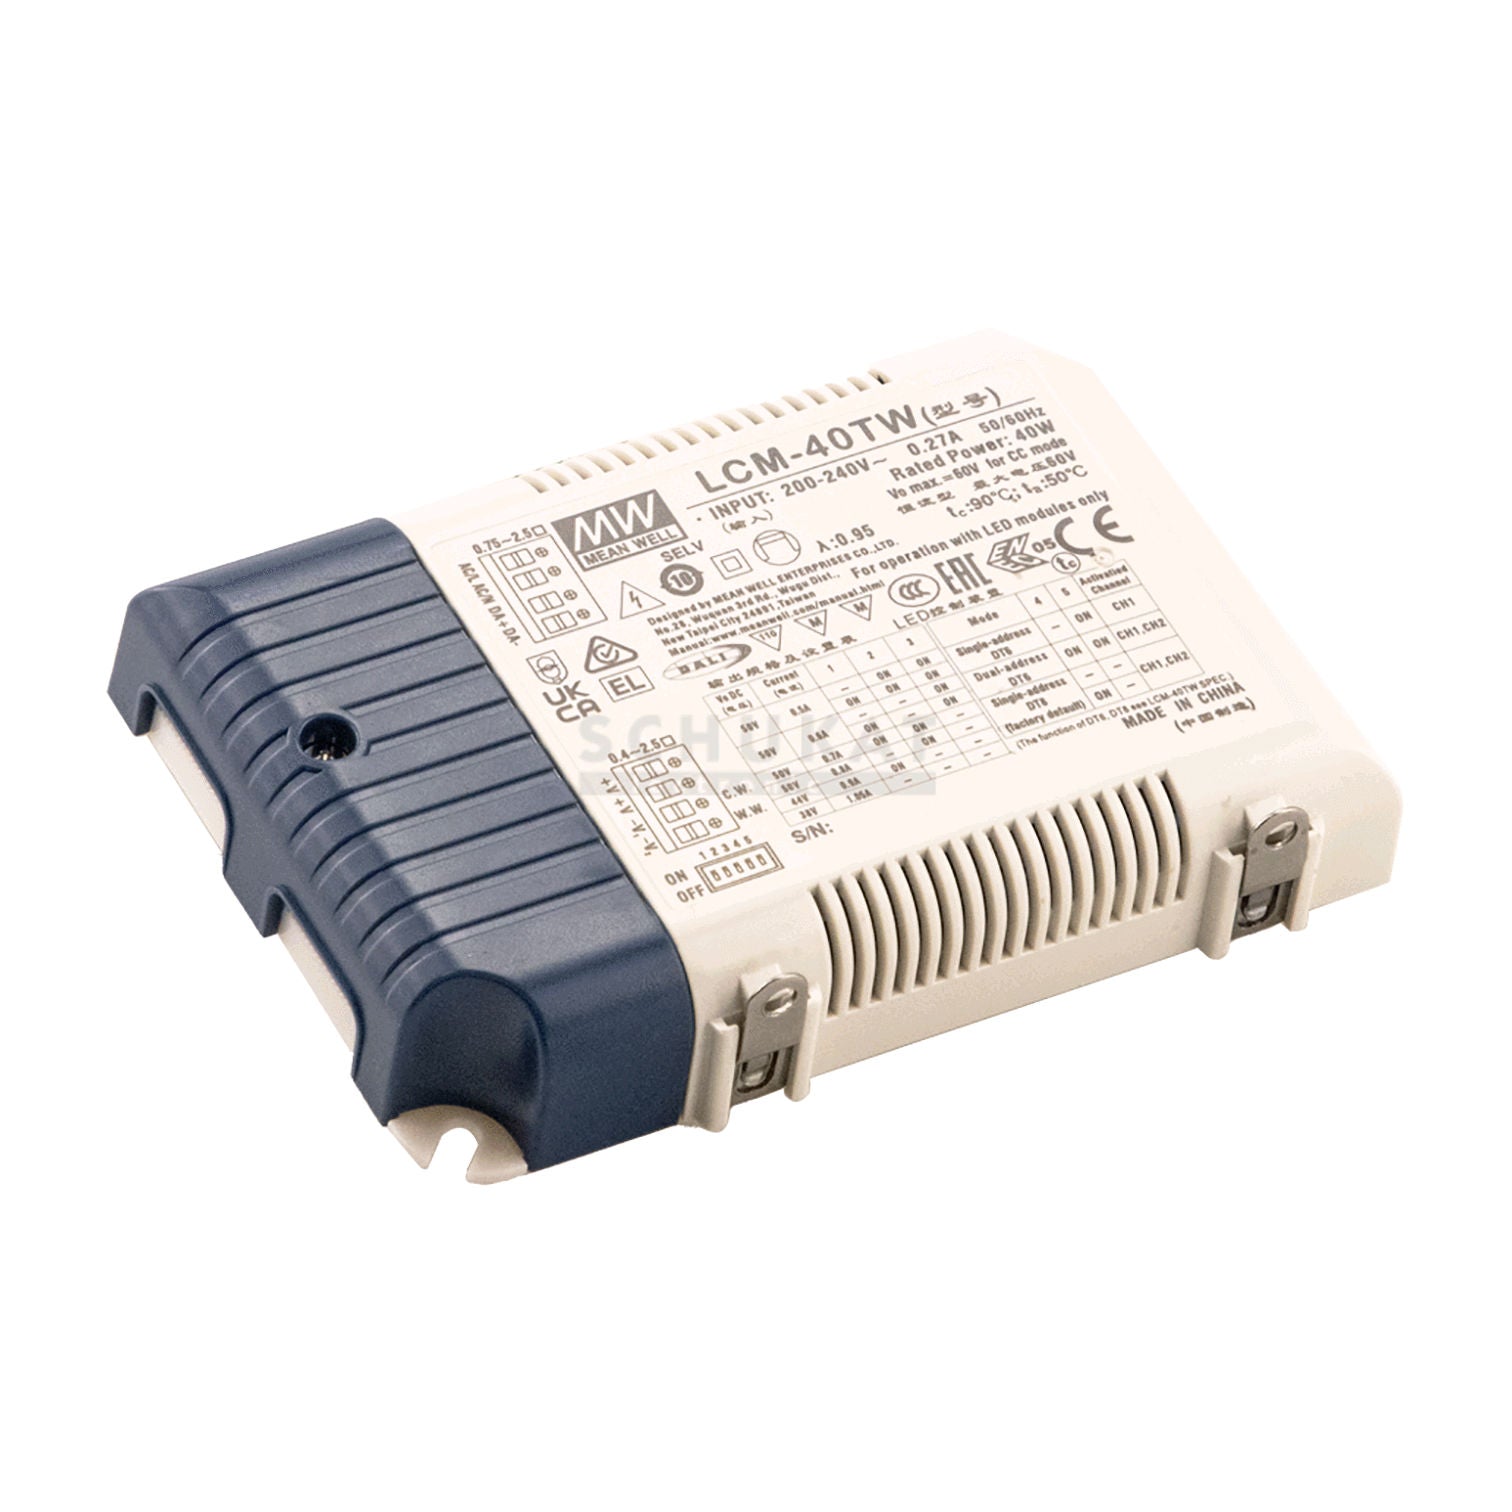 Driver LED cu curent constant Mean Well LCM-40TW 500 > 1050 mA 230V la 20 > 50VDC DIM Tunnable White